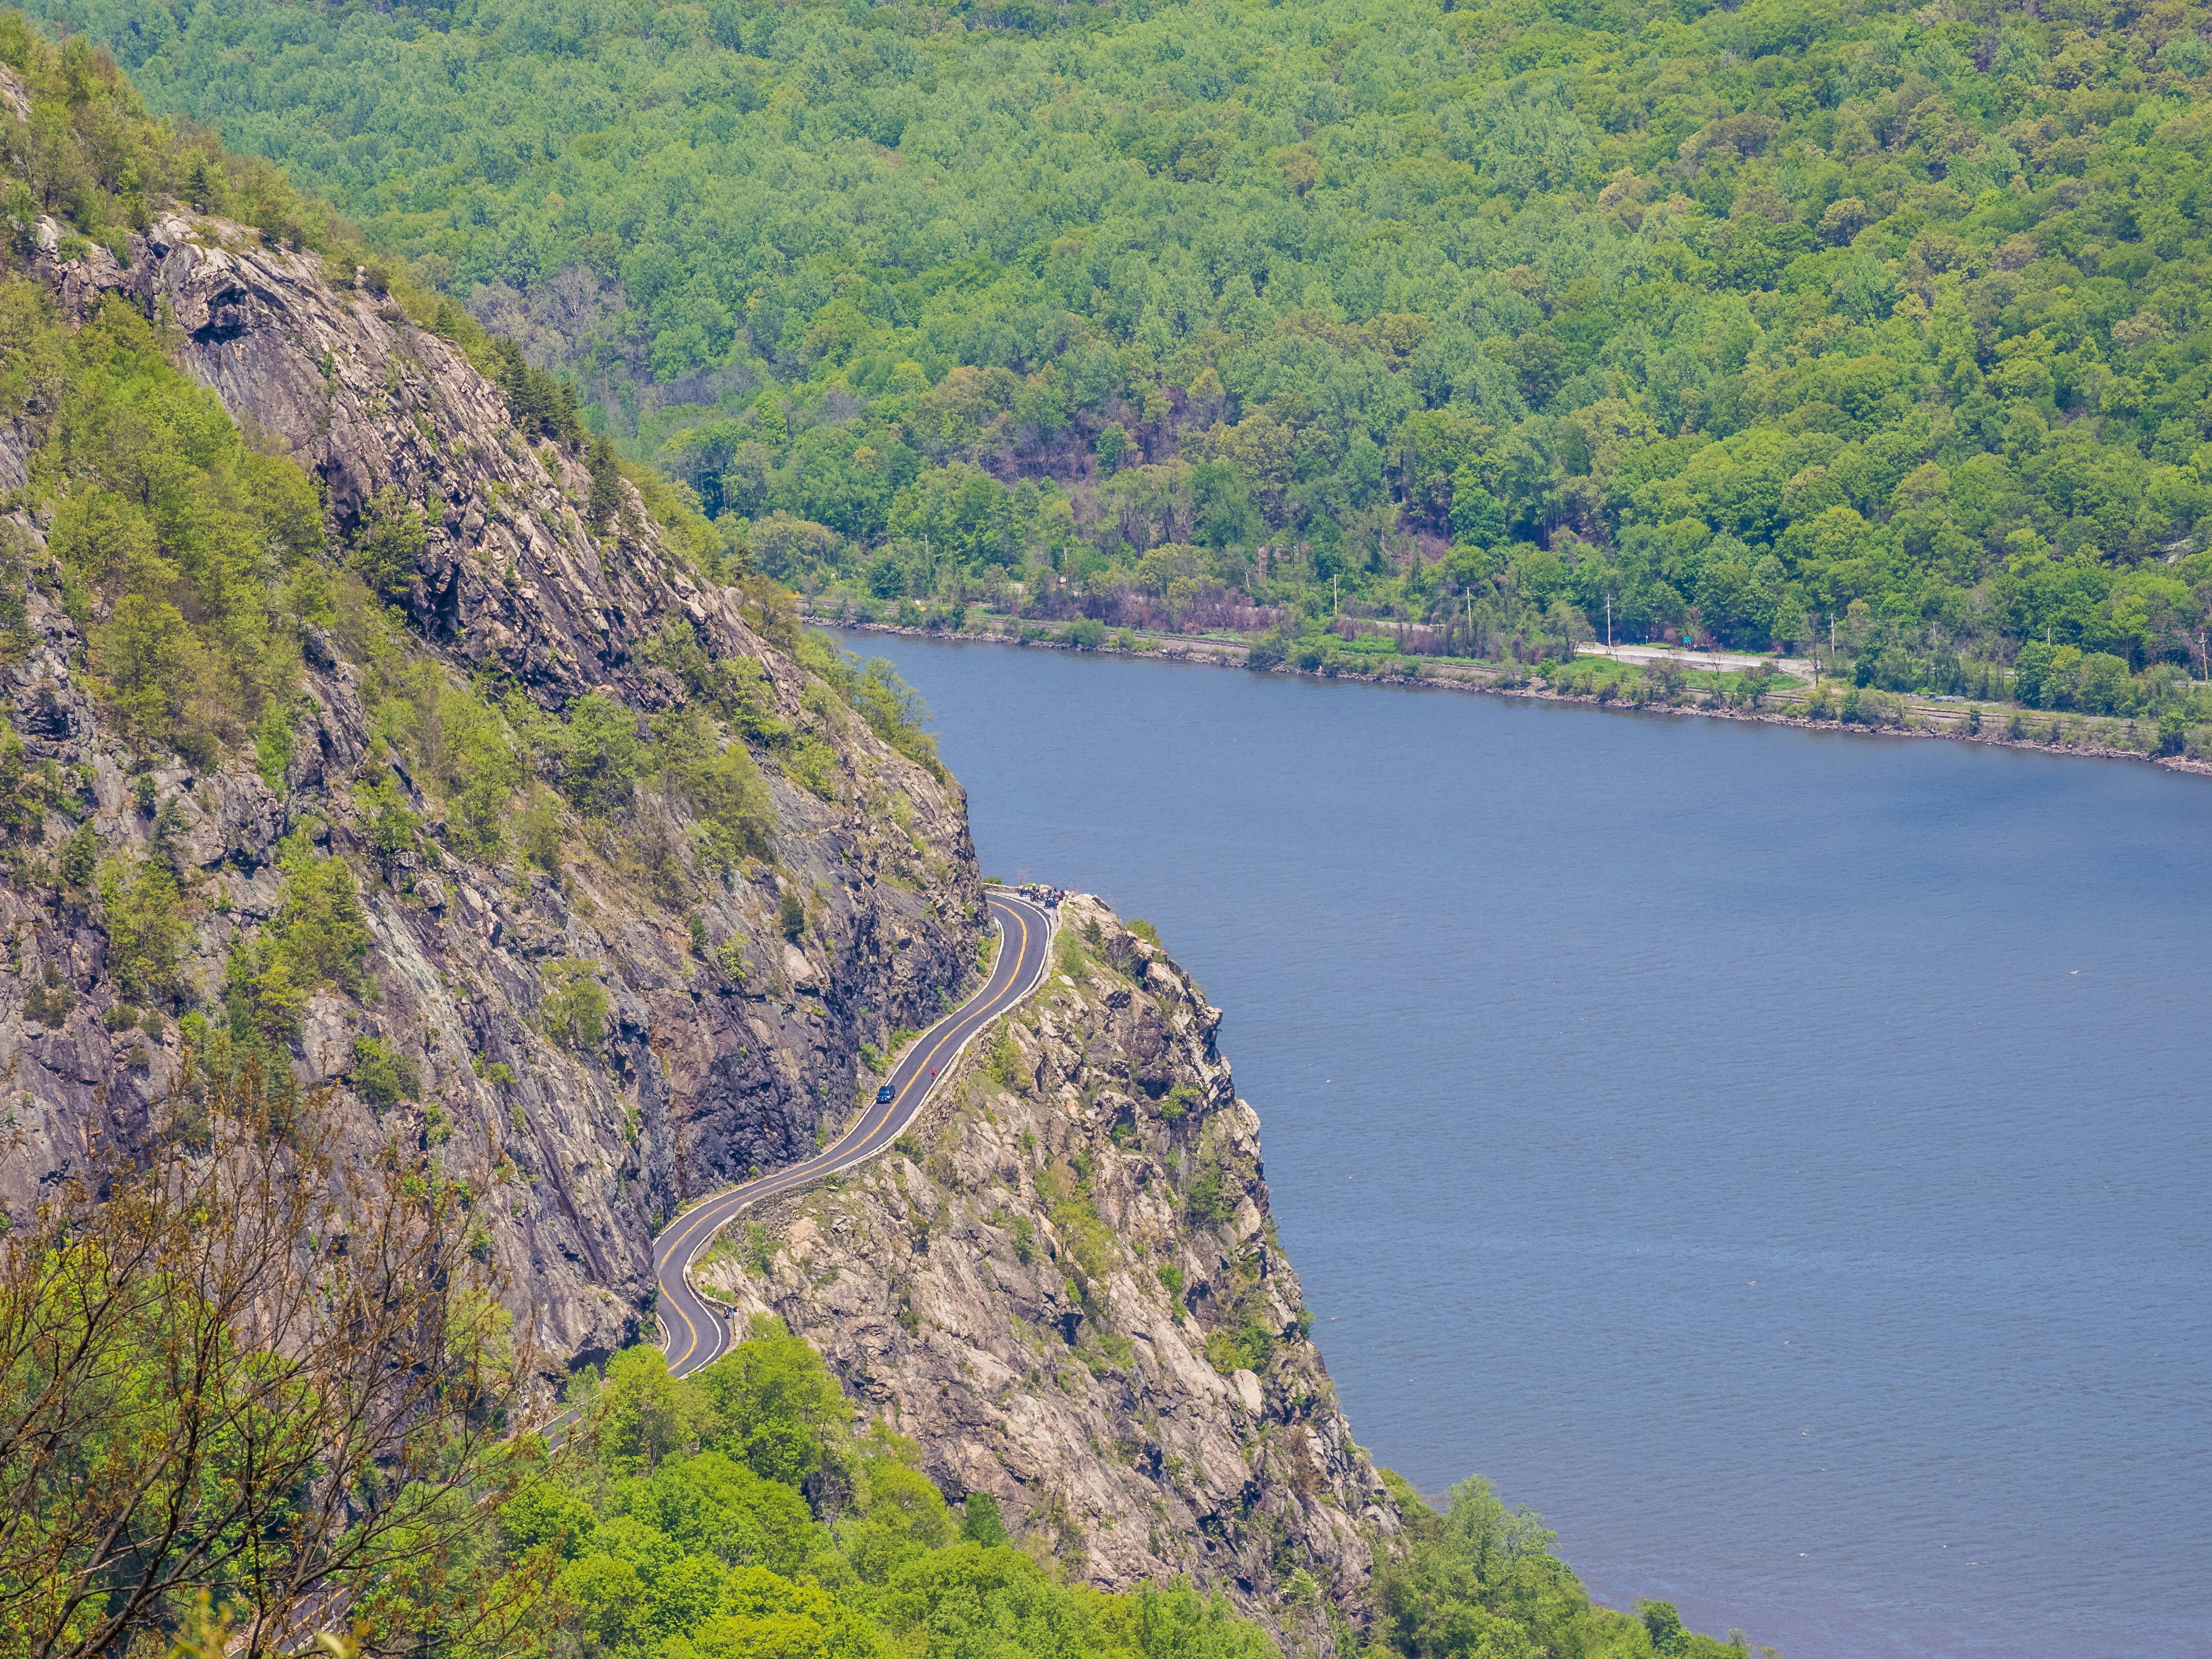 Scenic motorcycle route through Storm King Valley on the Hudson River